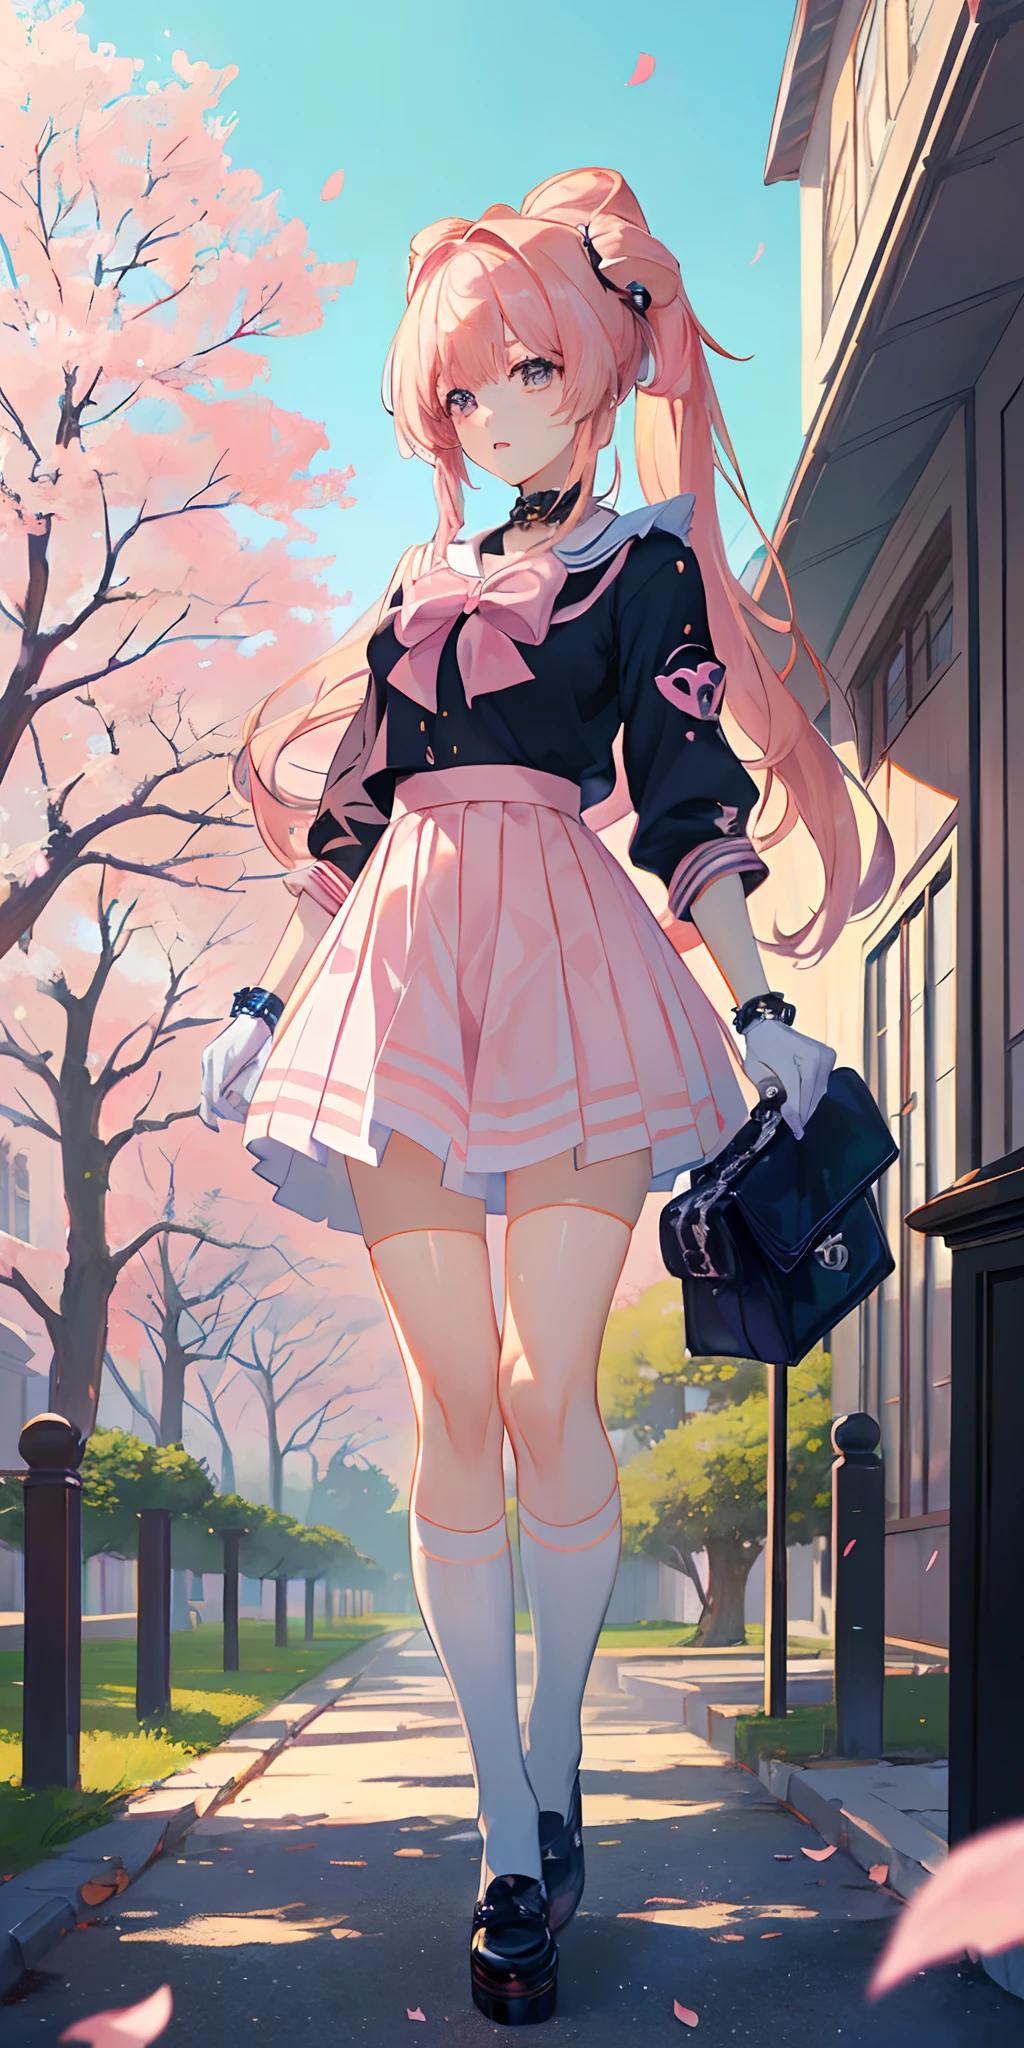 ((Anime style)), ((best quality)), ((masterpiece)), ((HDR+)), (best performance), (best lighting), (a college girl with pink Chanel hair with fringes), wearing a , in a [college road background on a Sakura tree falling petals], [Wlop], [Takehino Inoue], [Oh! Great]